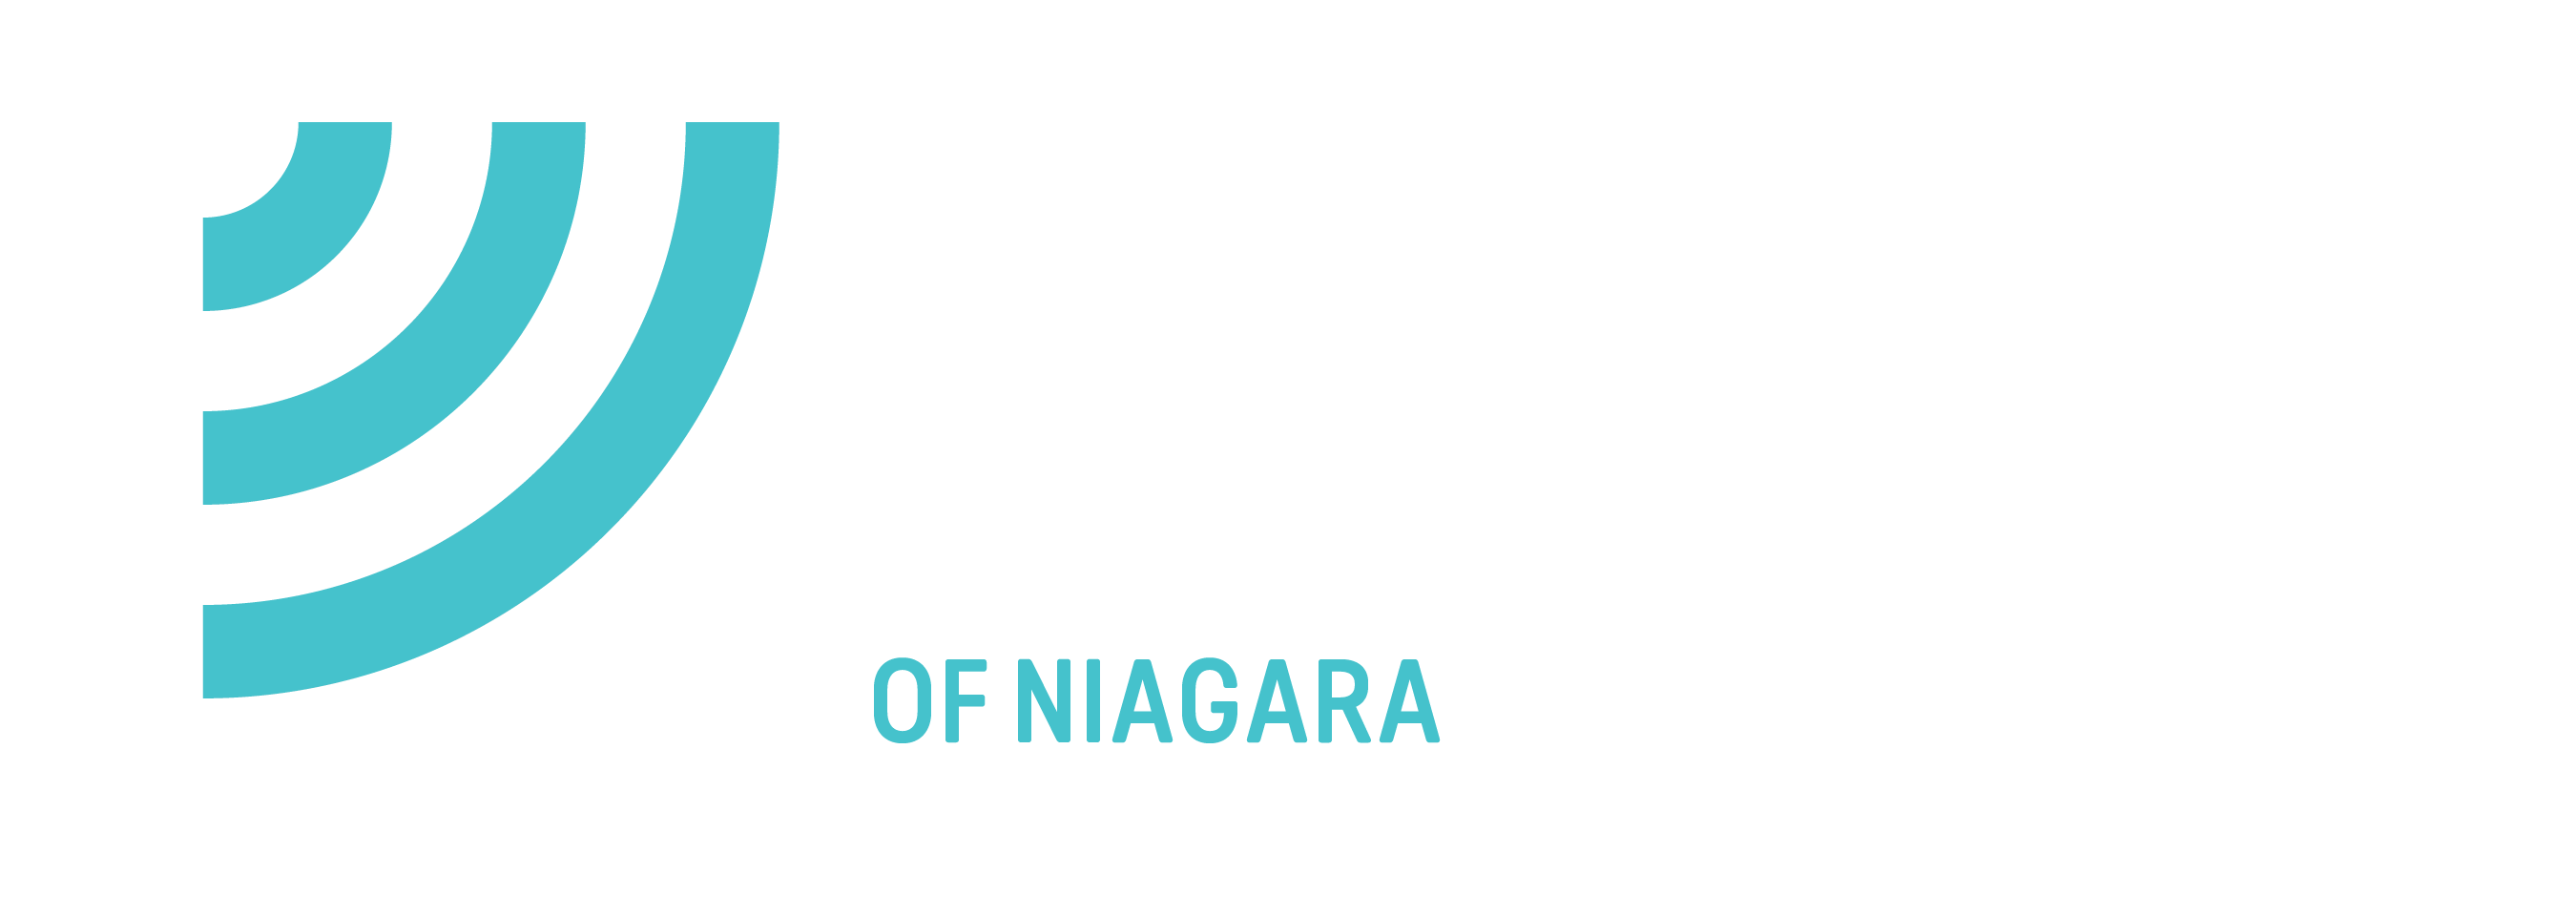 COMIC CON SUPPORTS BIG BROTHERS BIG SISTERS OF NIAGARA - Big Brothers Big Sisters of Niagara